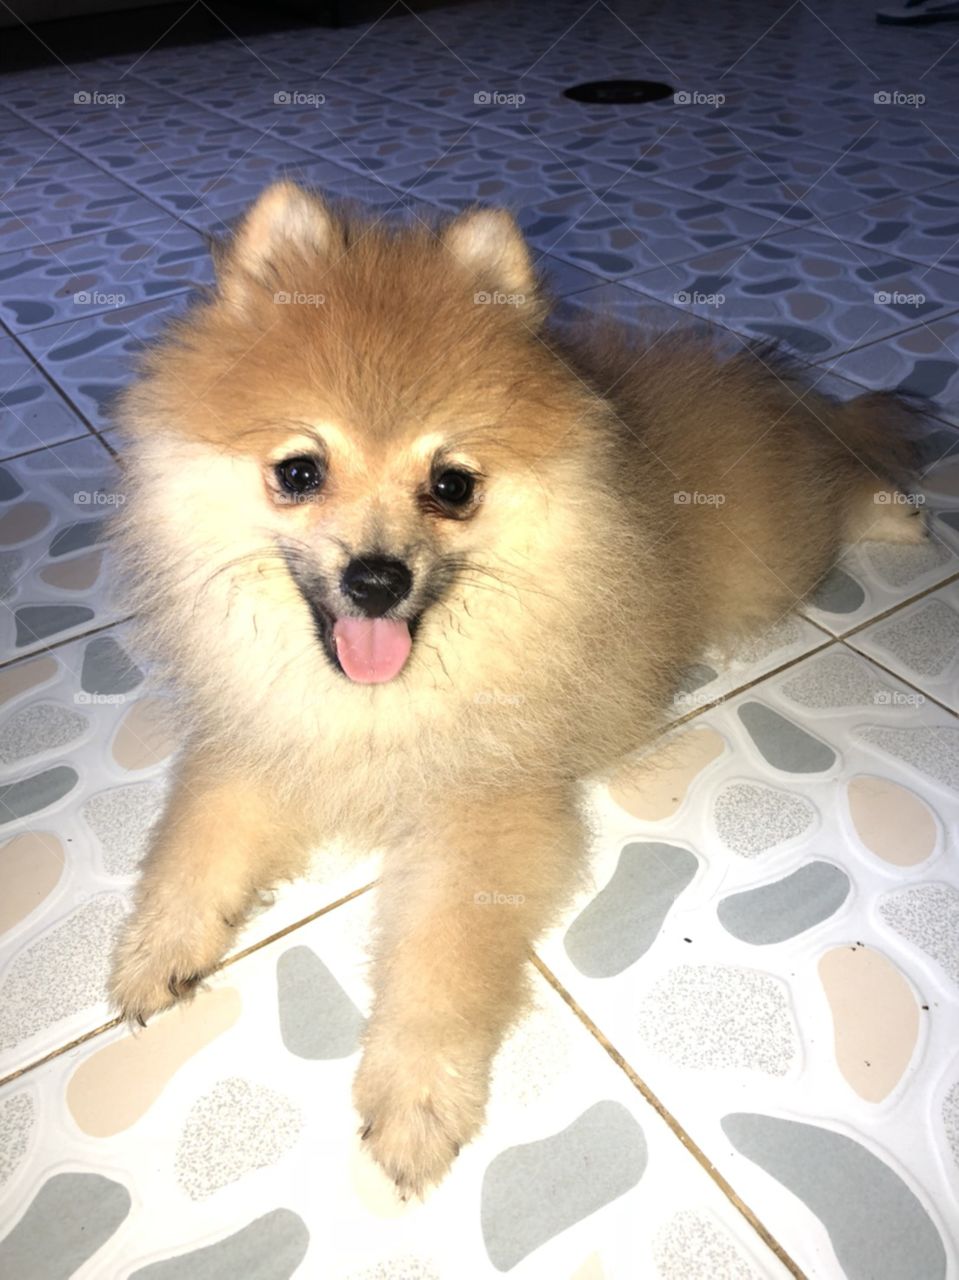 the orange brown puppy "pomeranian" is sitting on the floor.